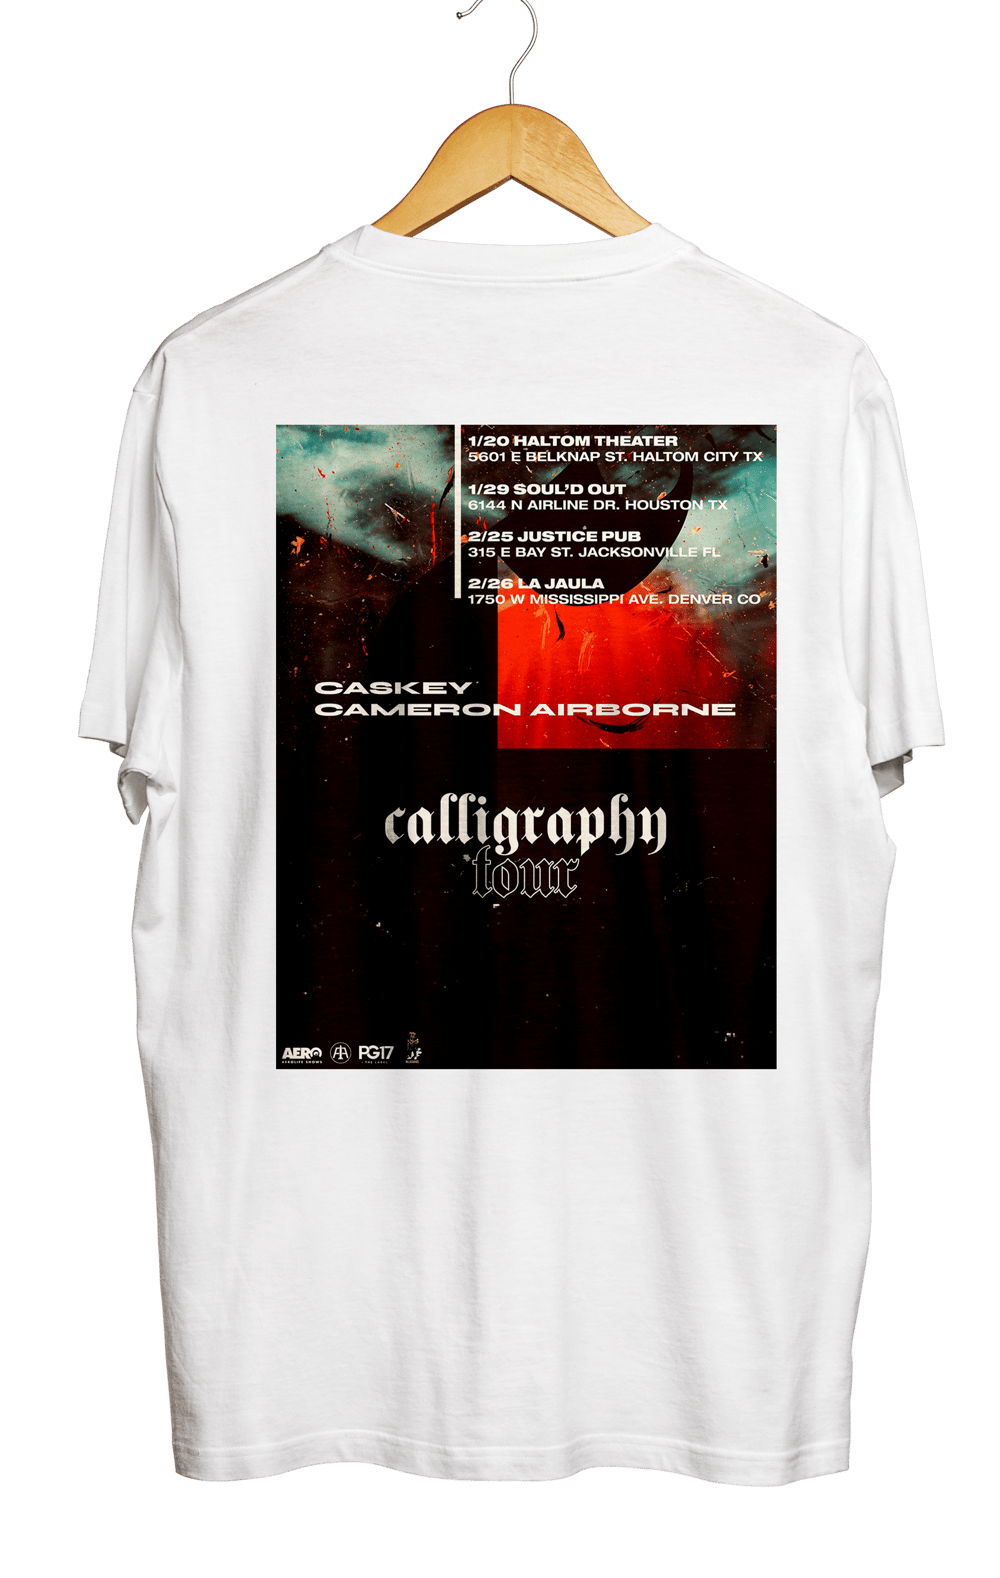 Caskey Caligraphy Tour Merch in White